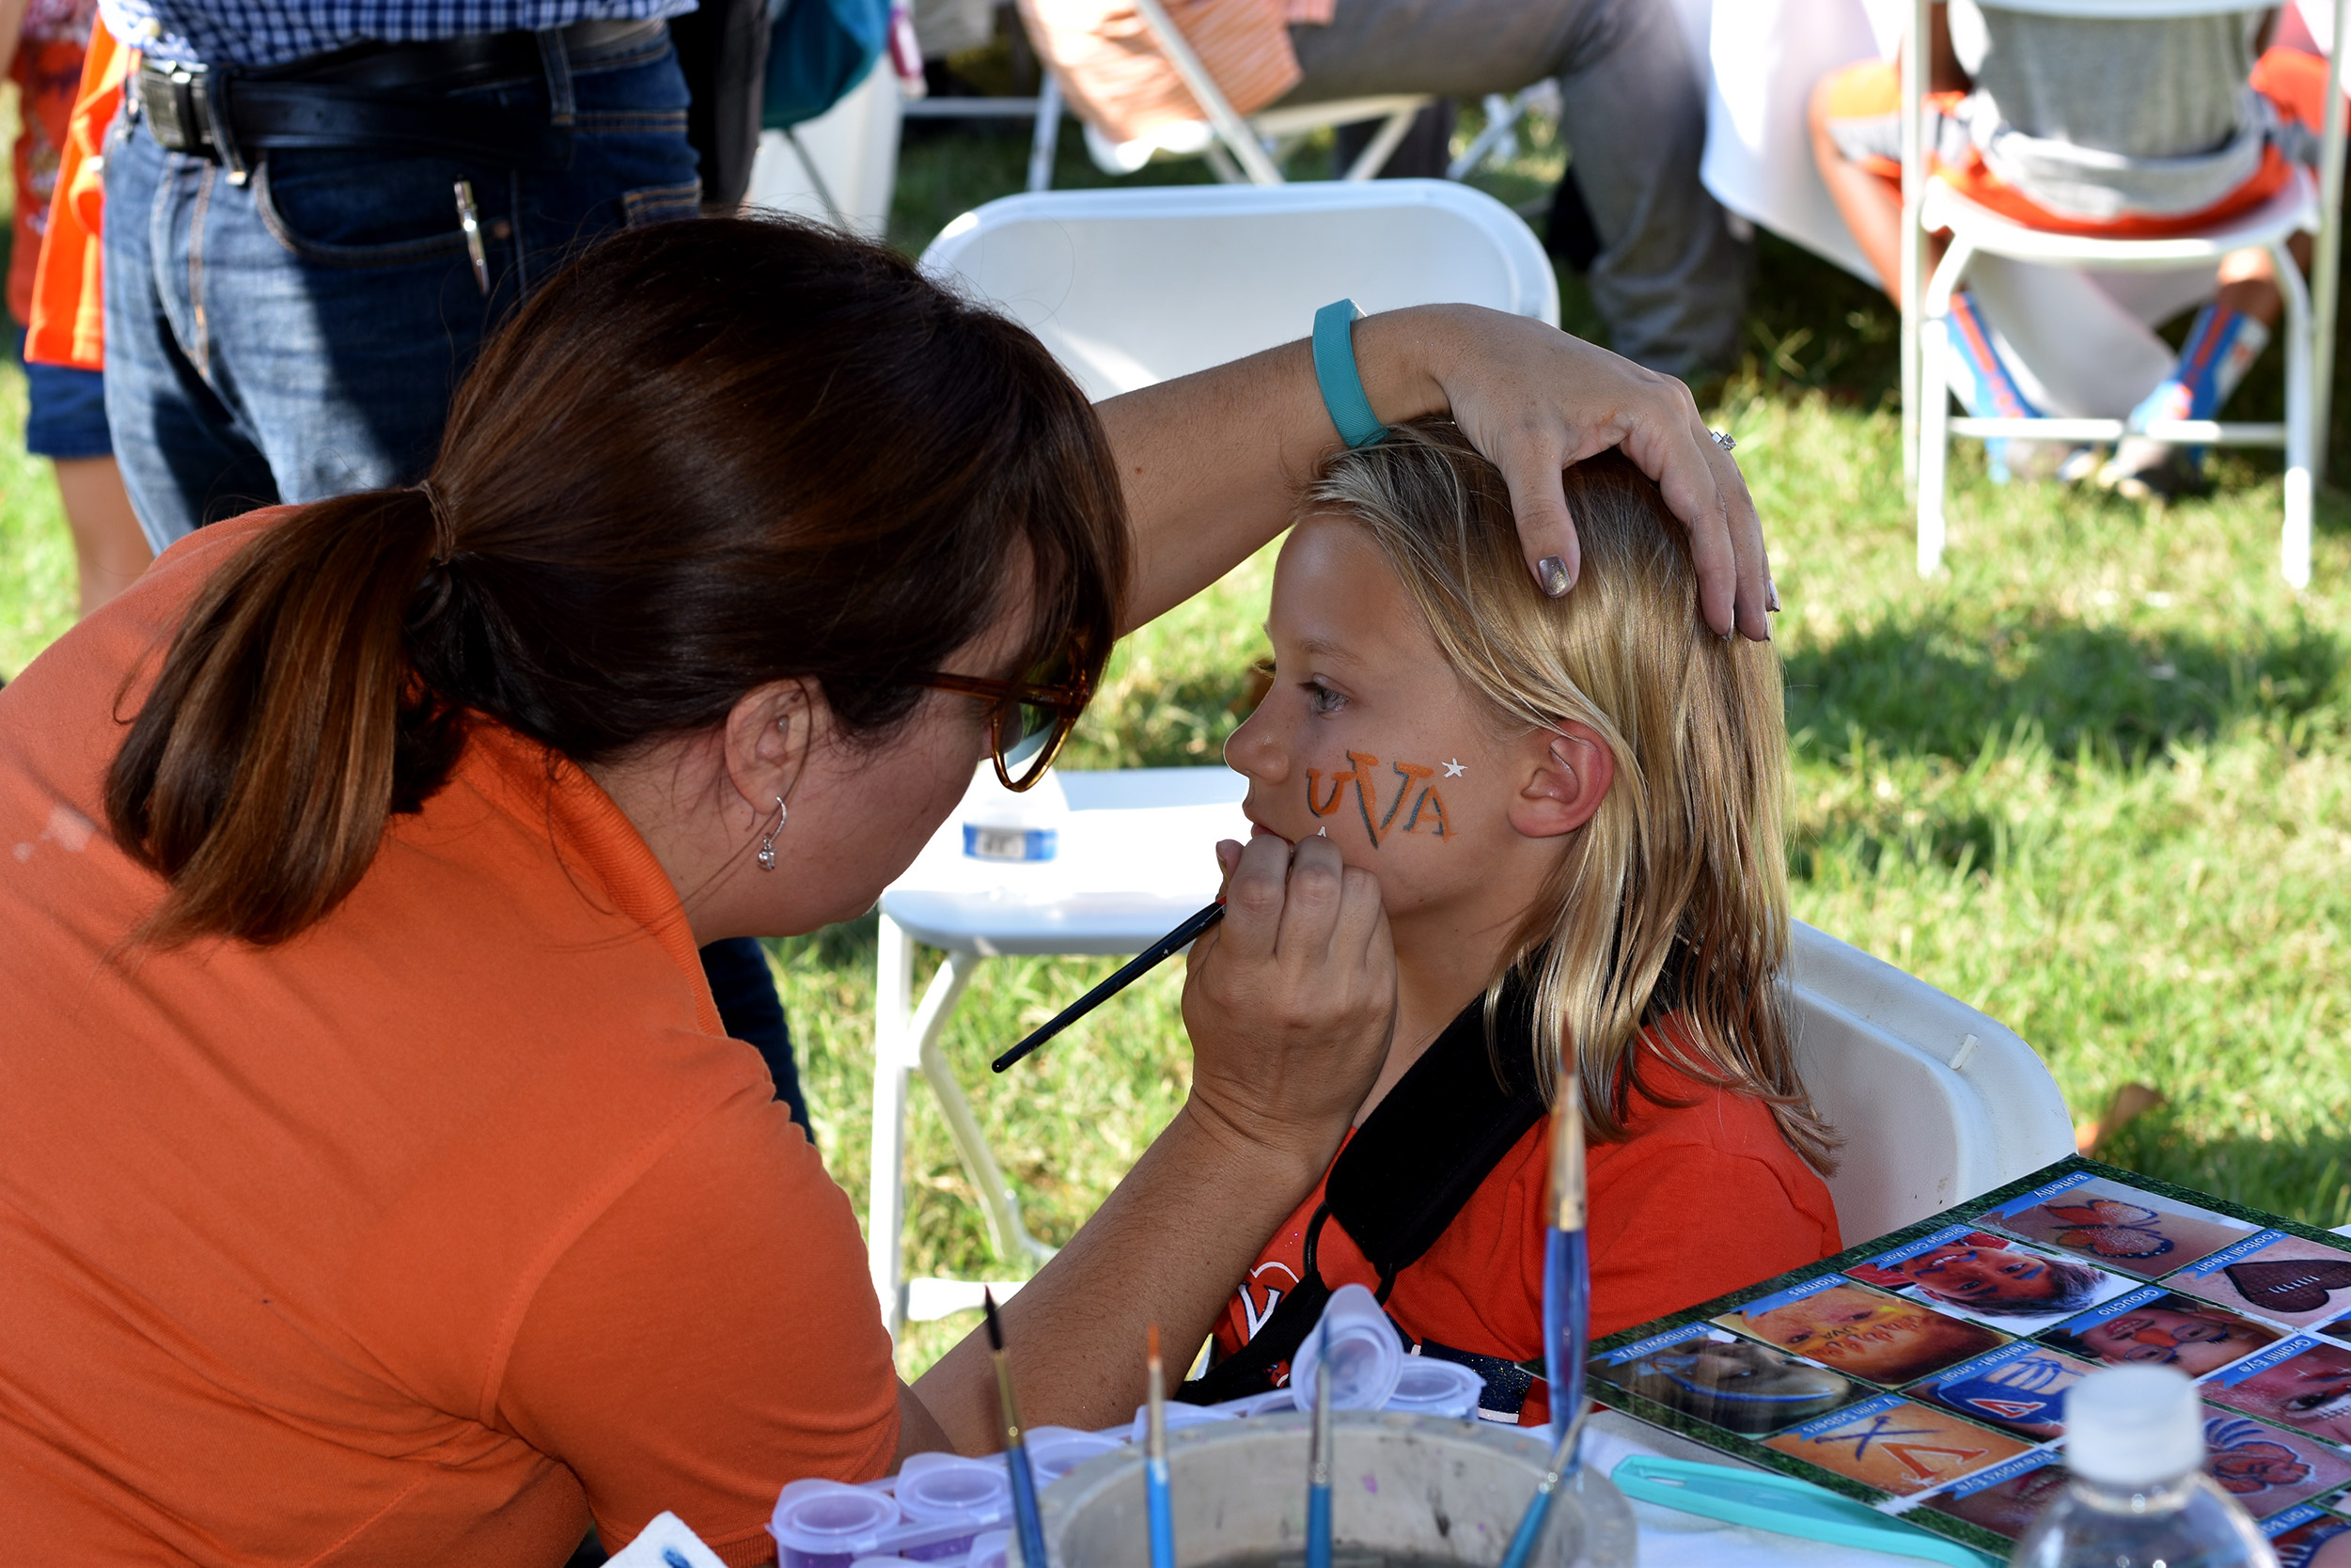 Child having her face painted at a tailgate stateion